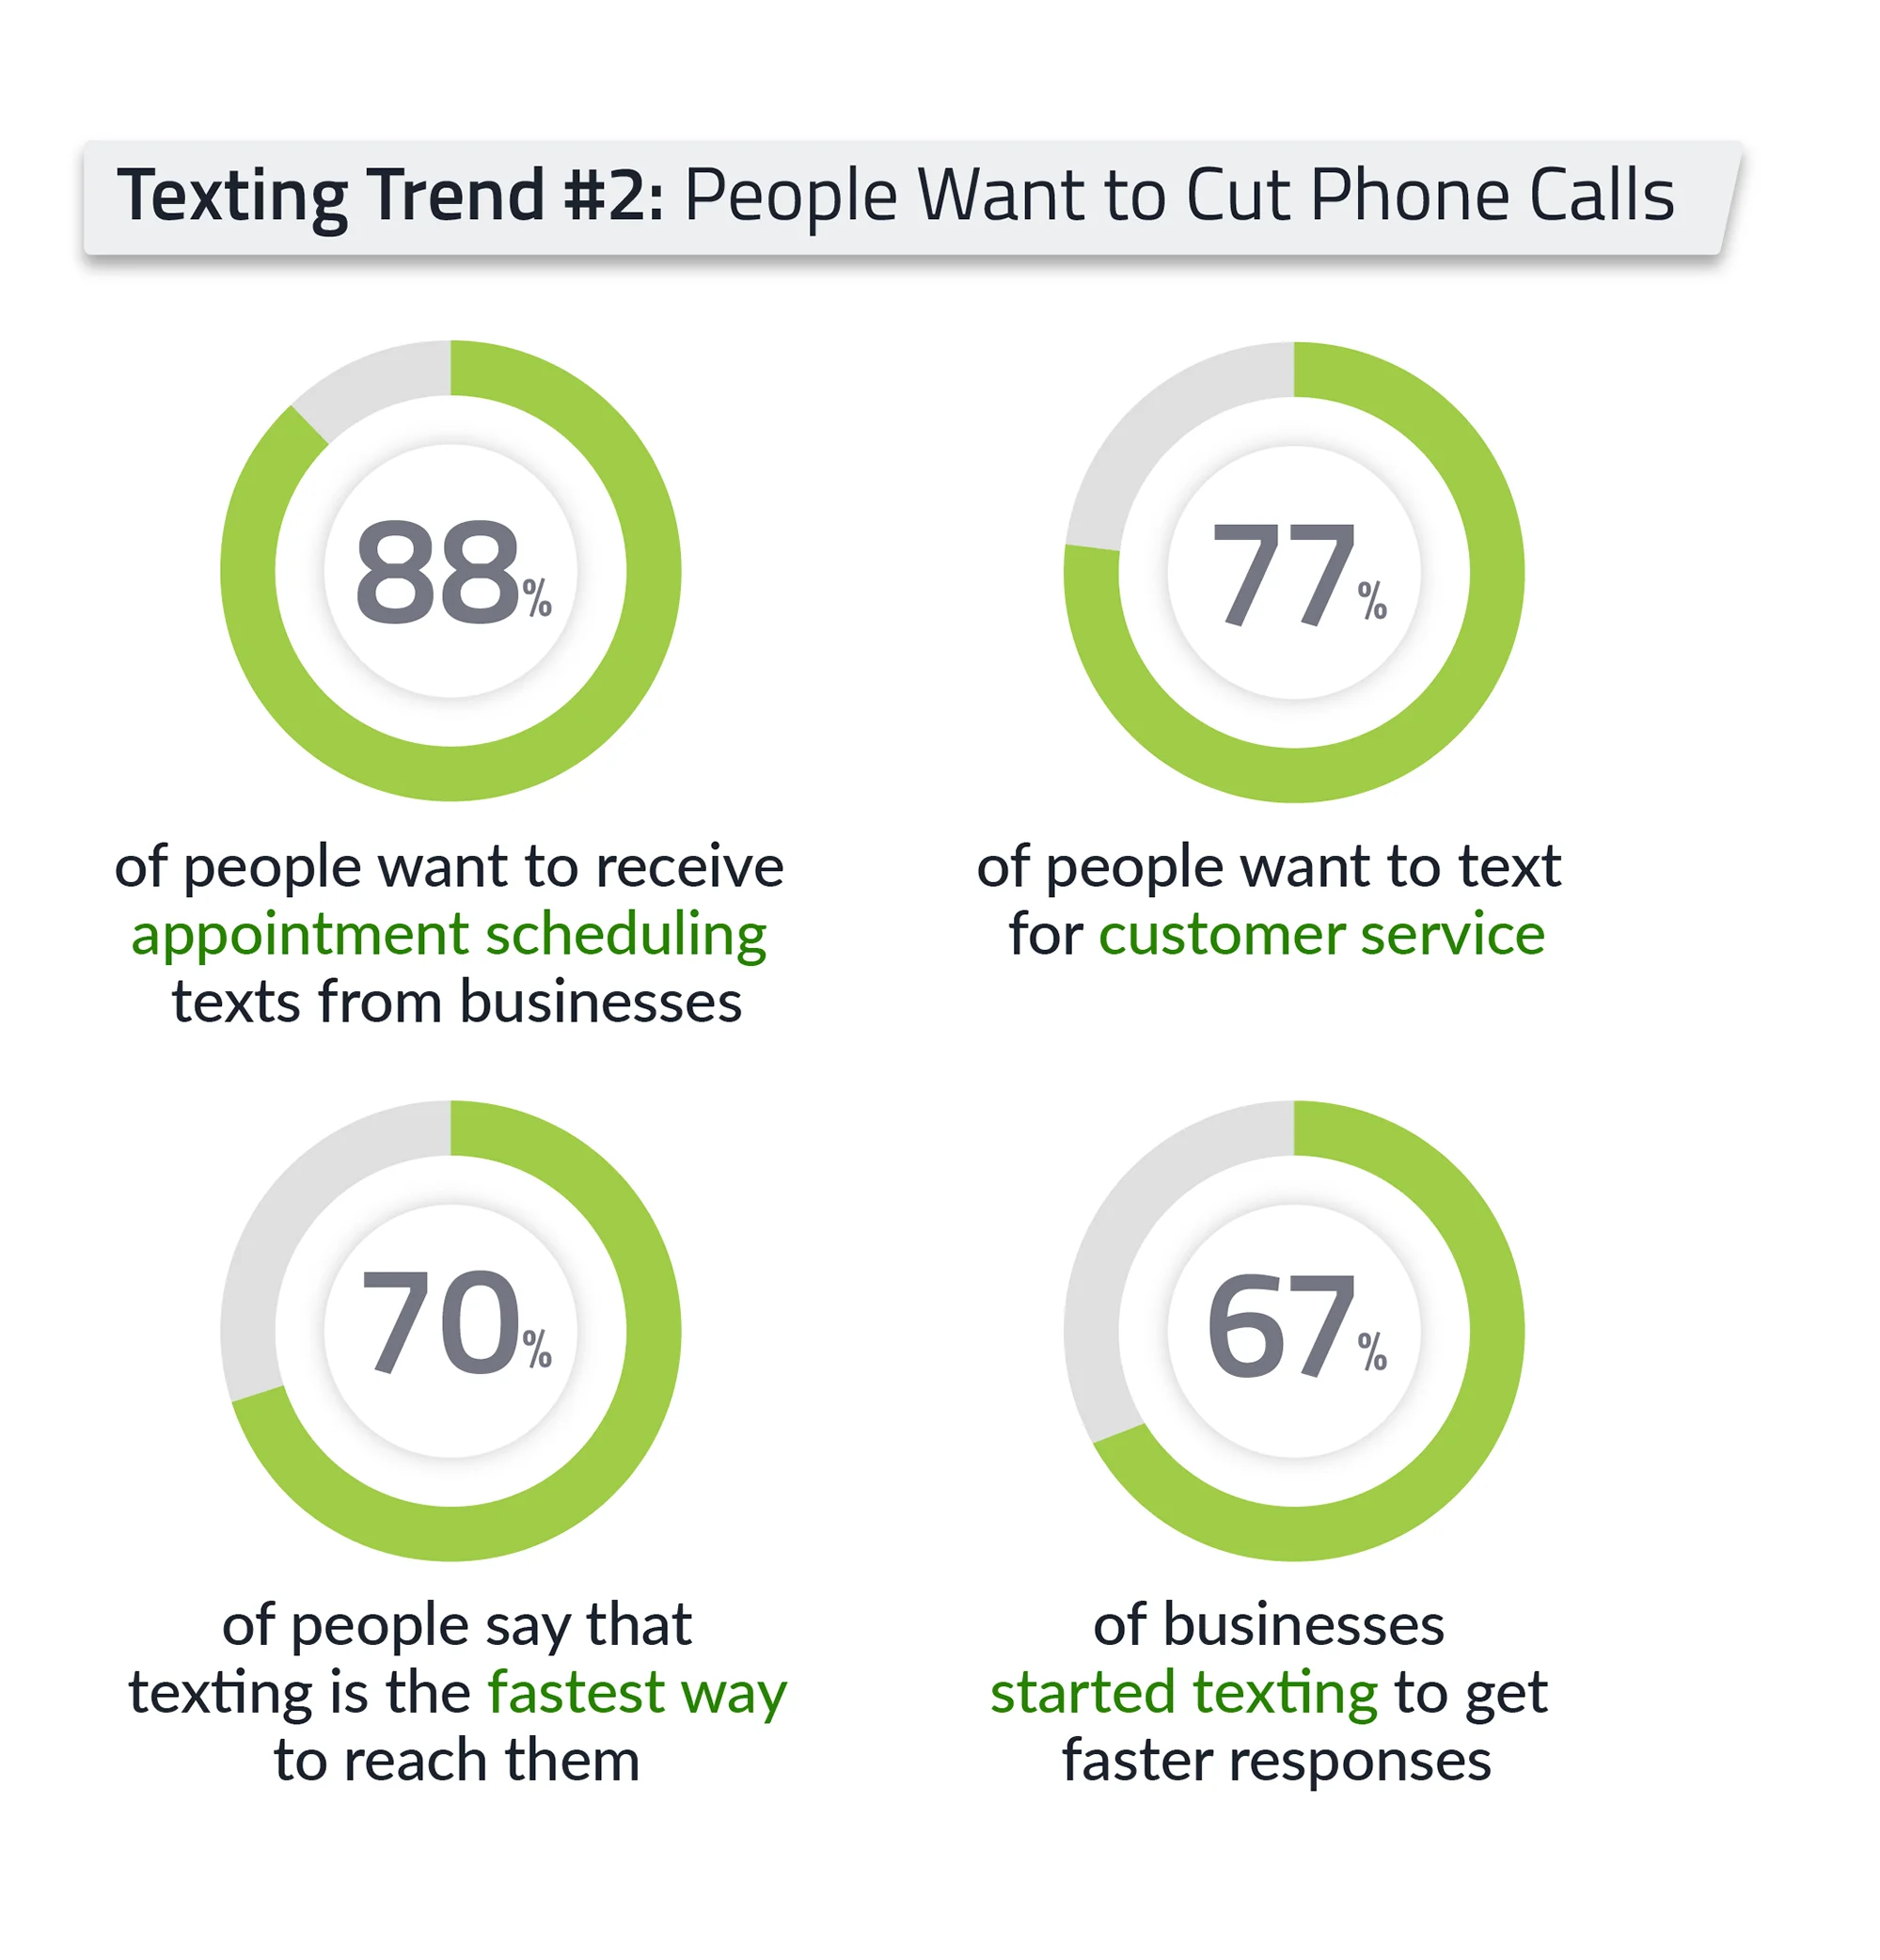 text-messaging-trend-people-want-to-cut-phone-calls